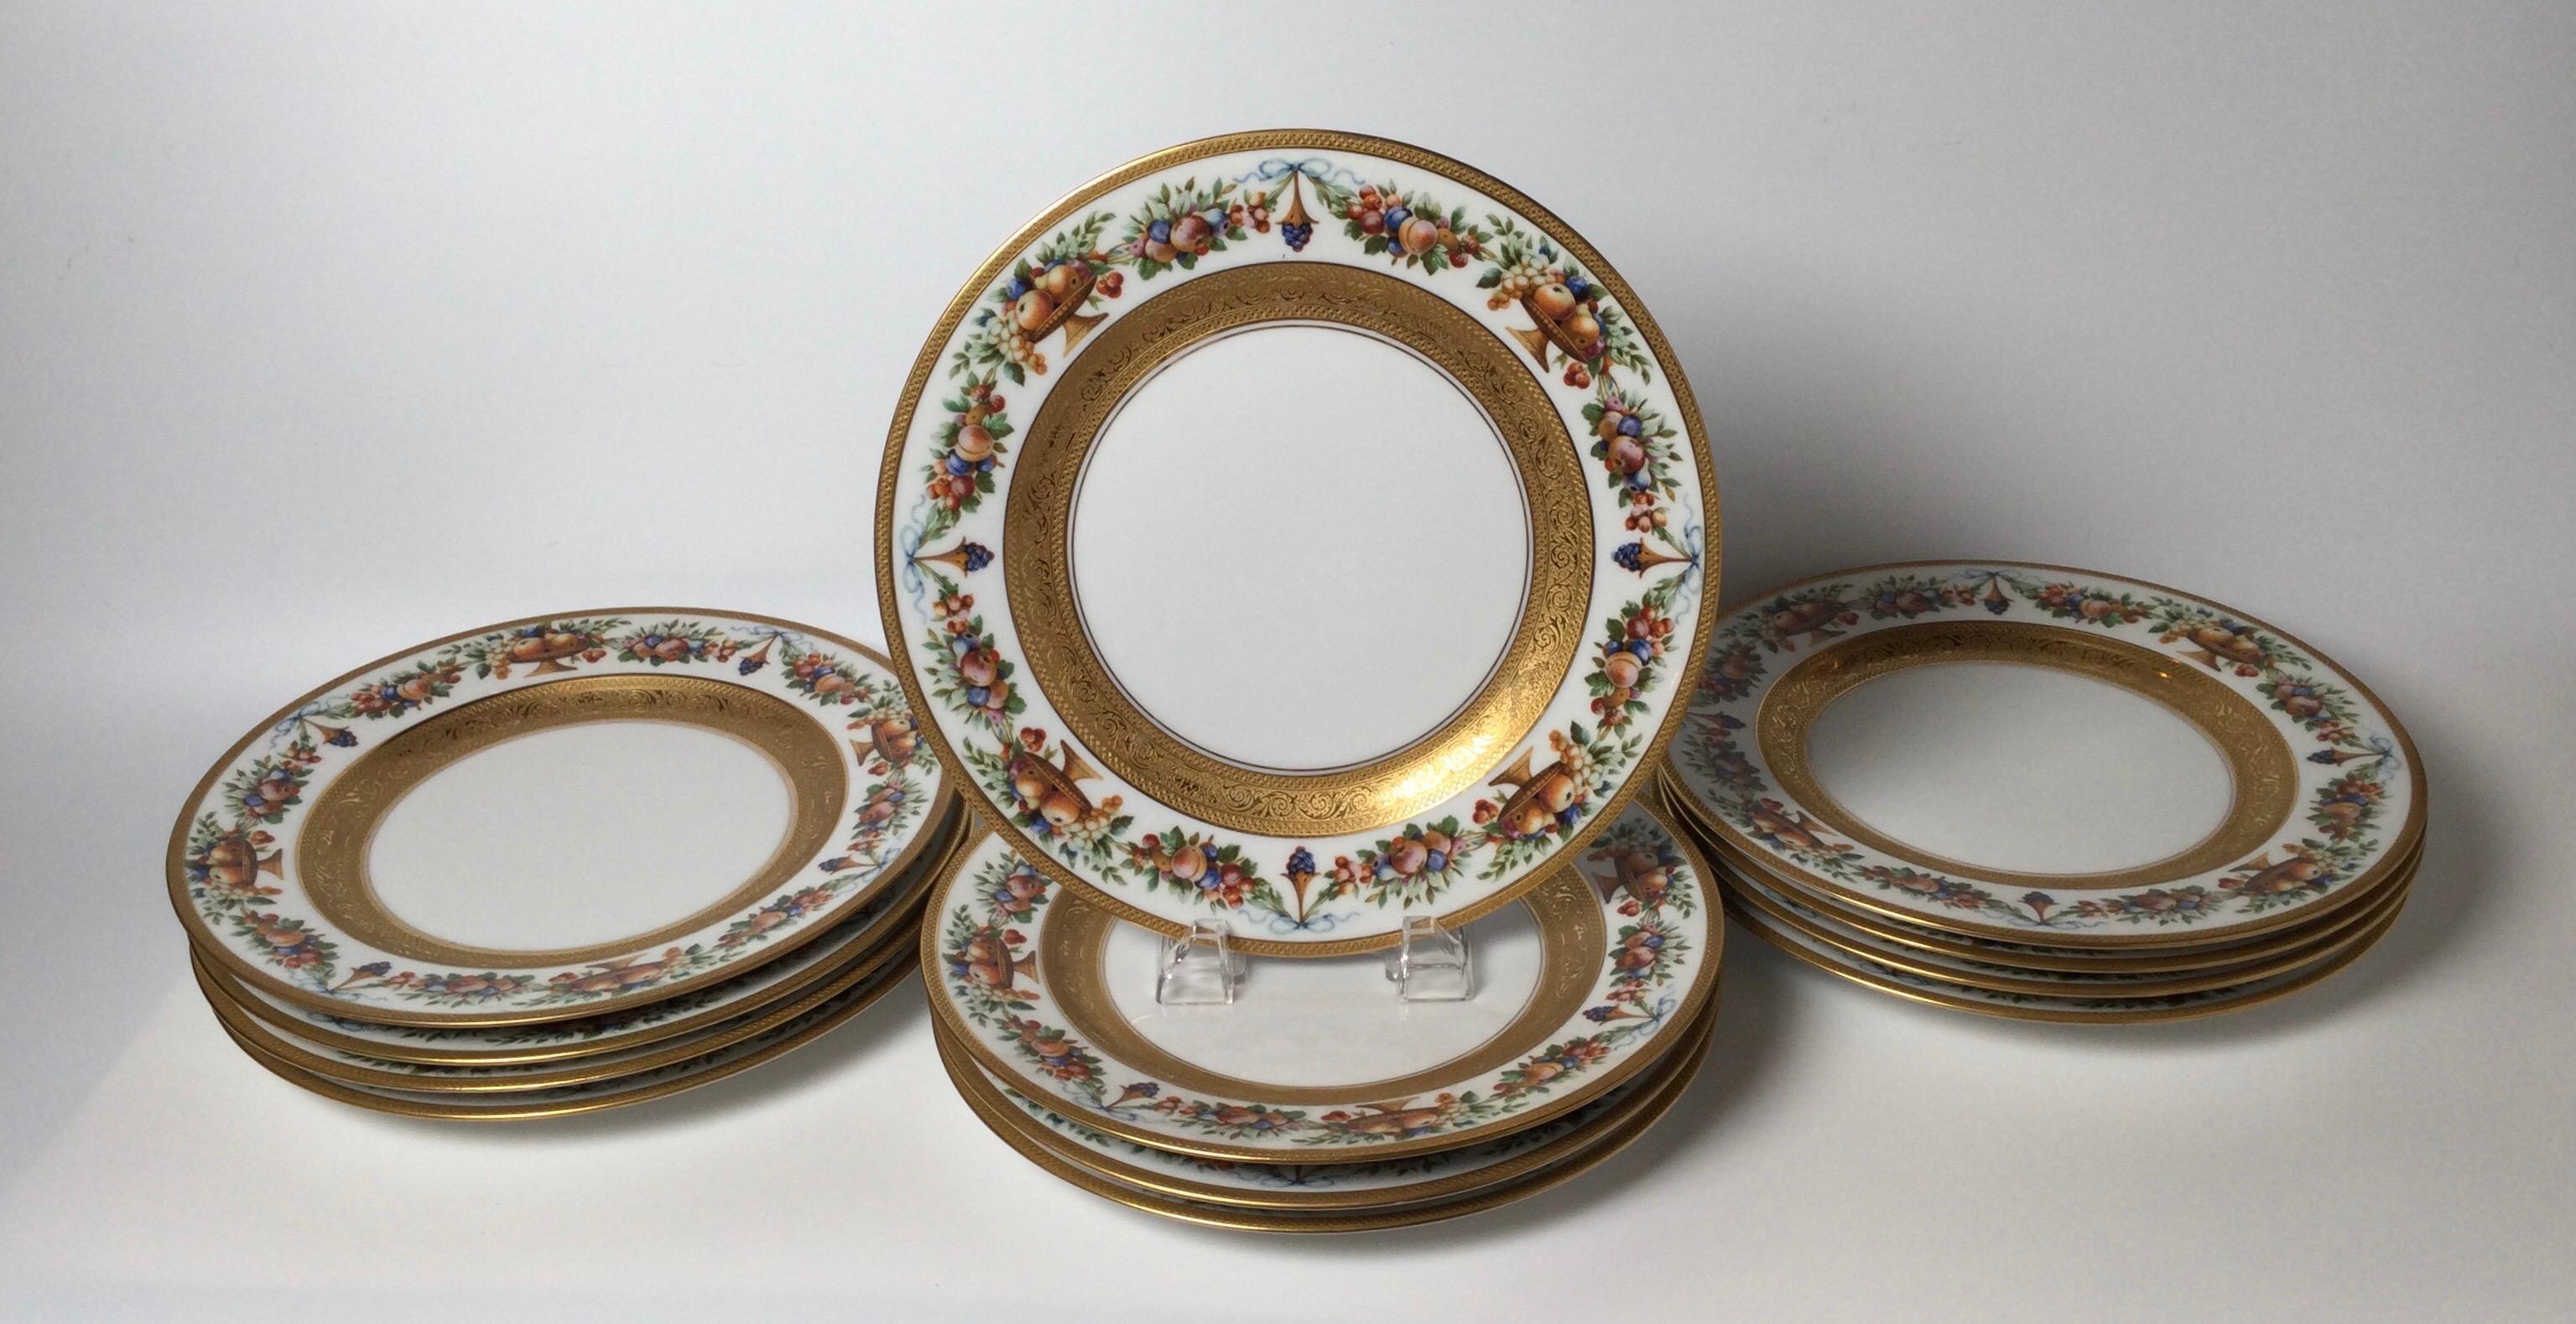 Mid-20th Century Set of 12 Gilt Banded Service Dinner Plates with Fruit Borders